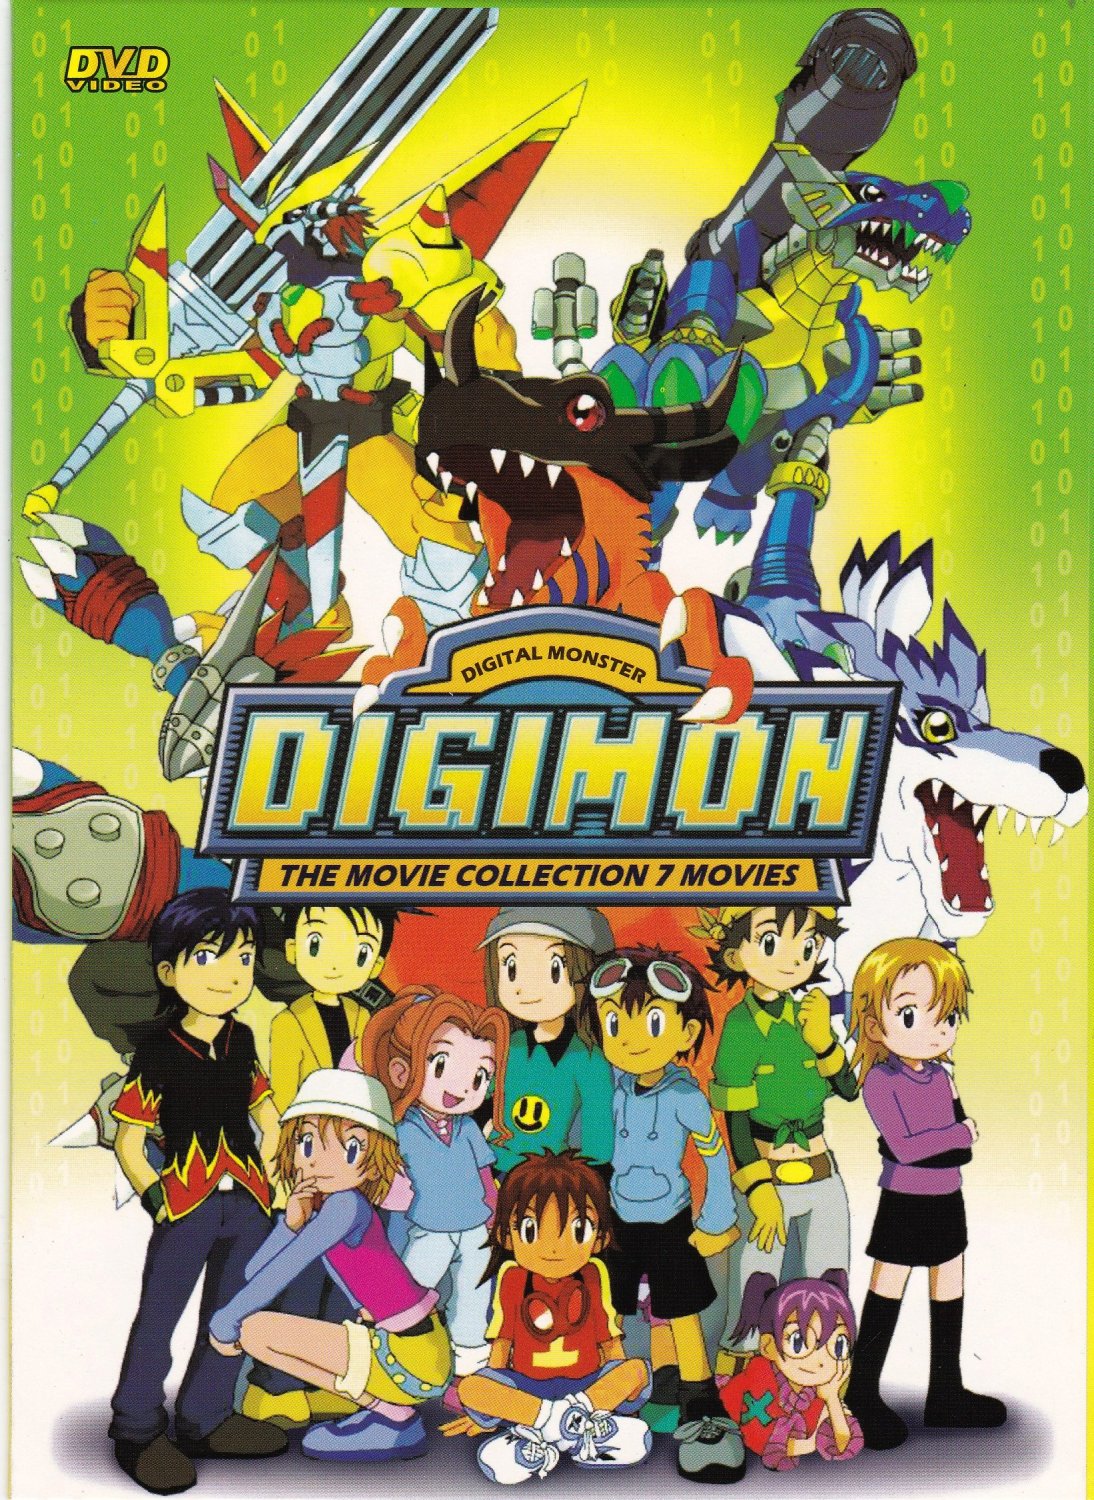 DVD ANIME DIGIMON Digital Monster The Movie Collection Box Set Region All